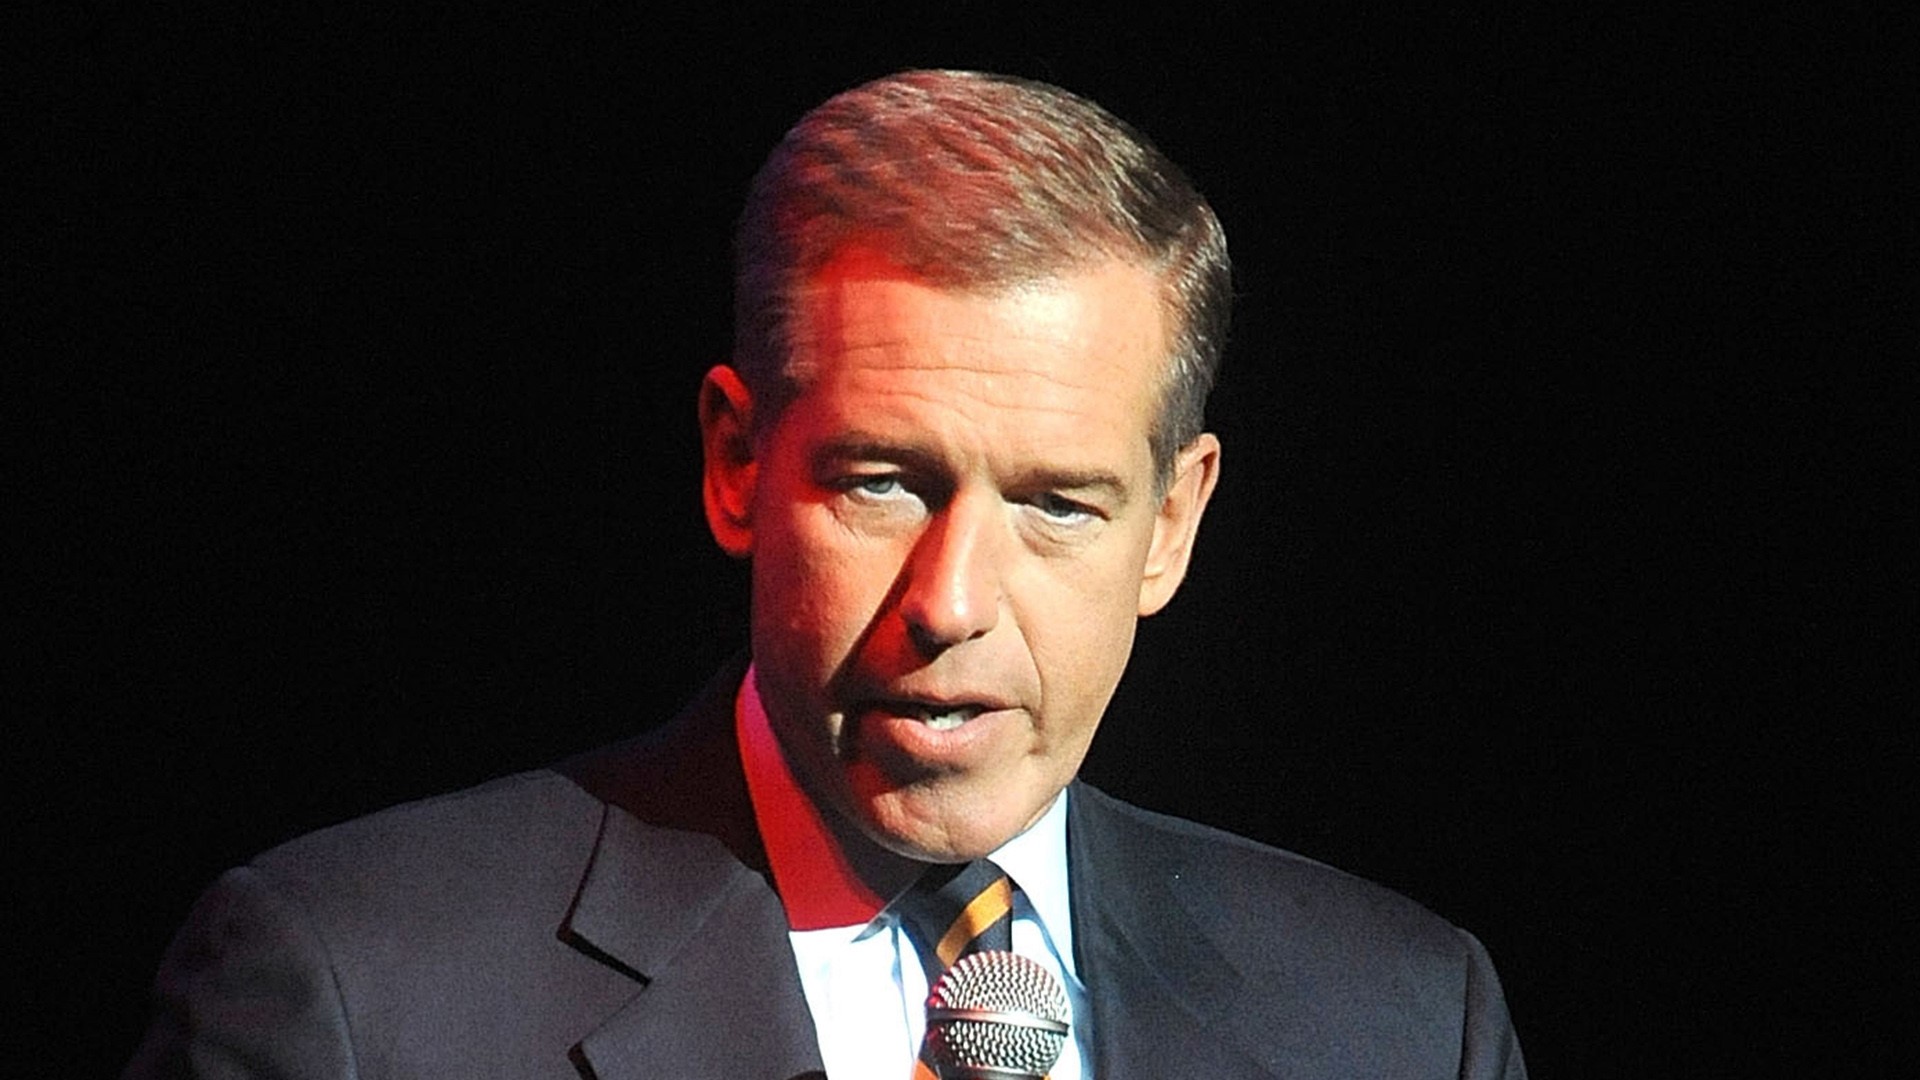 Where is Brian Williams going after 28 years at MSNBC? Enceleb